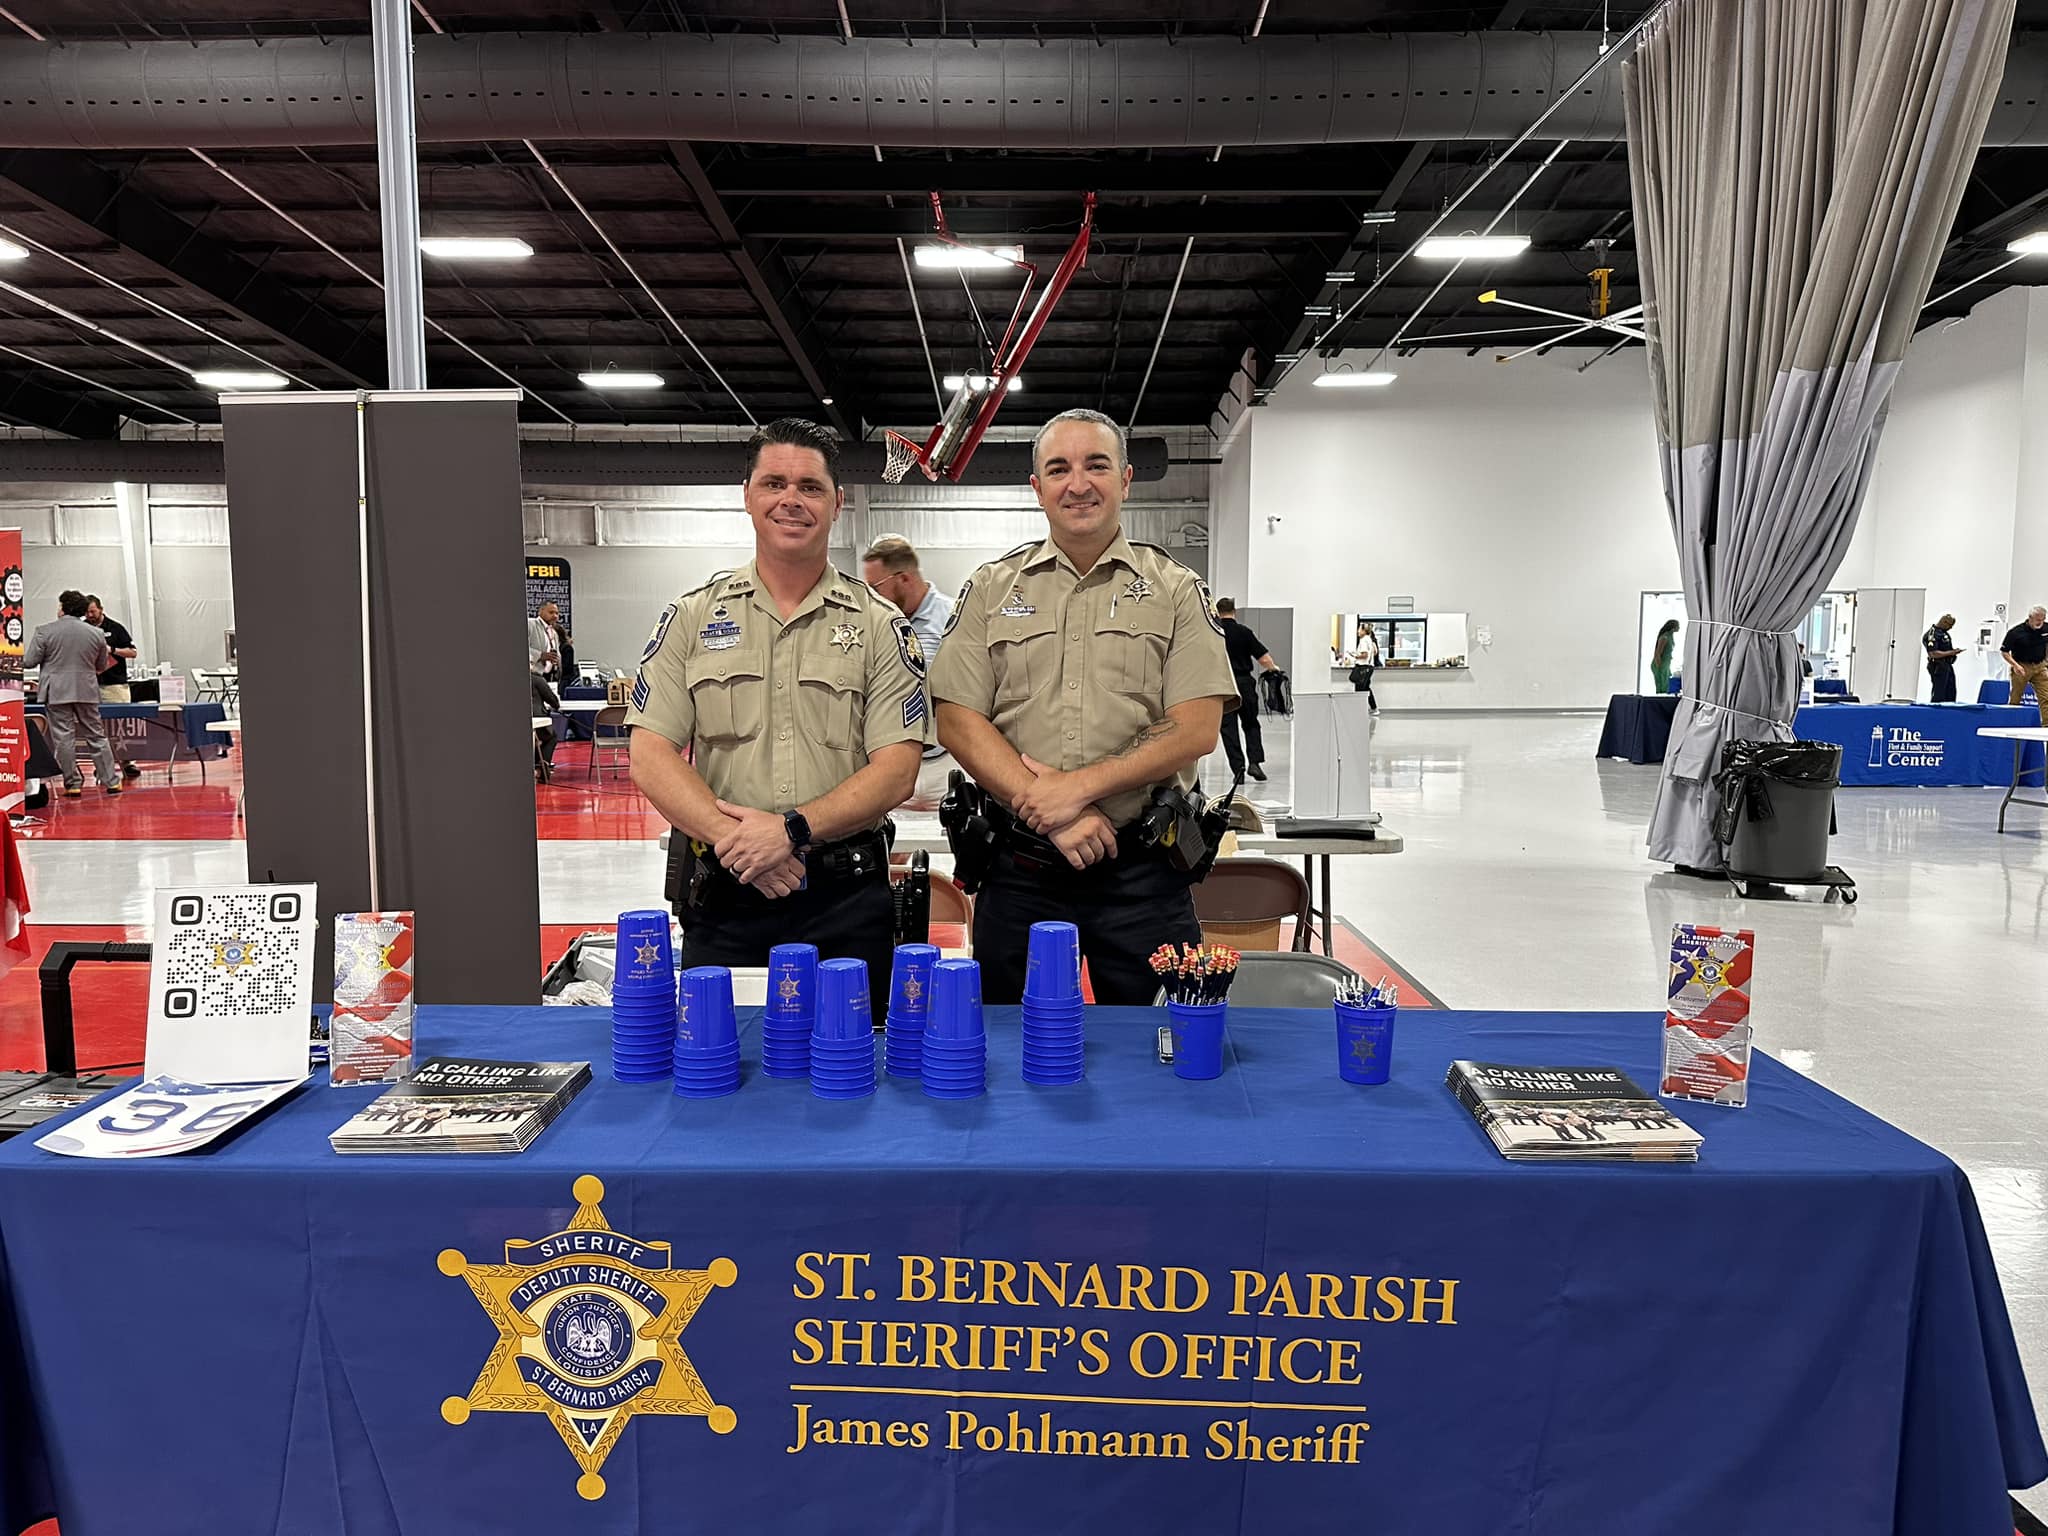 Interested in a career in law enforcement? Stop by today between 9 a.m. and 2 p.m. to see what SBS